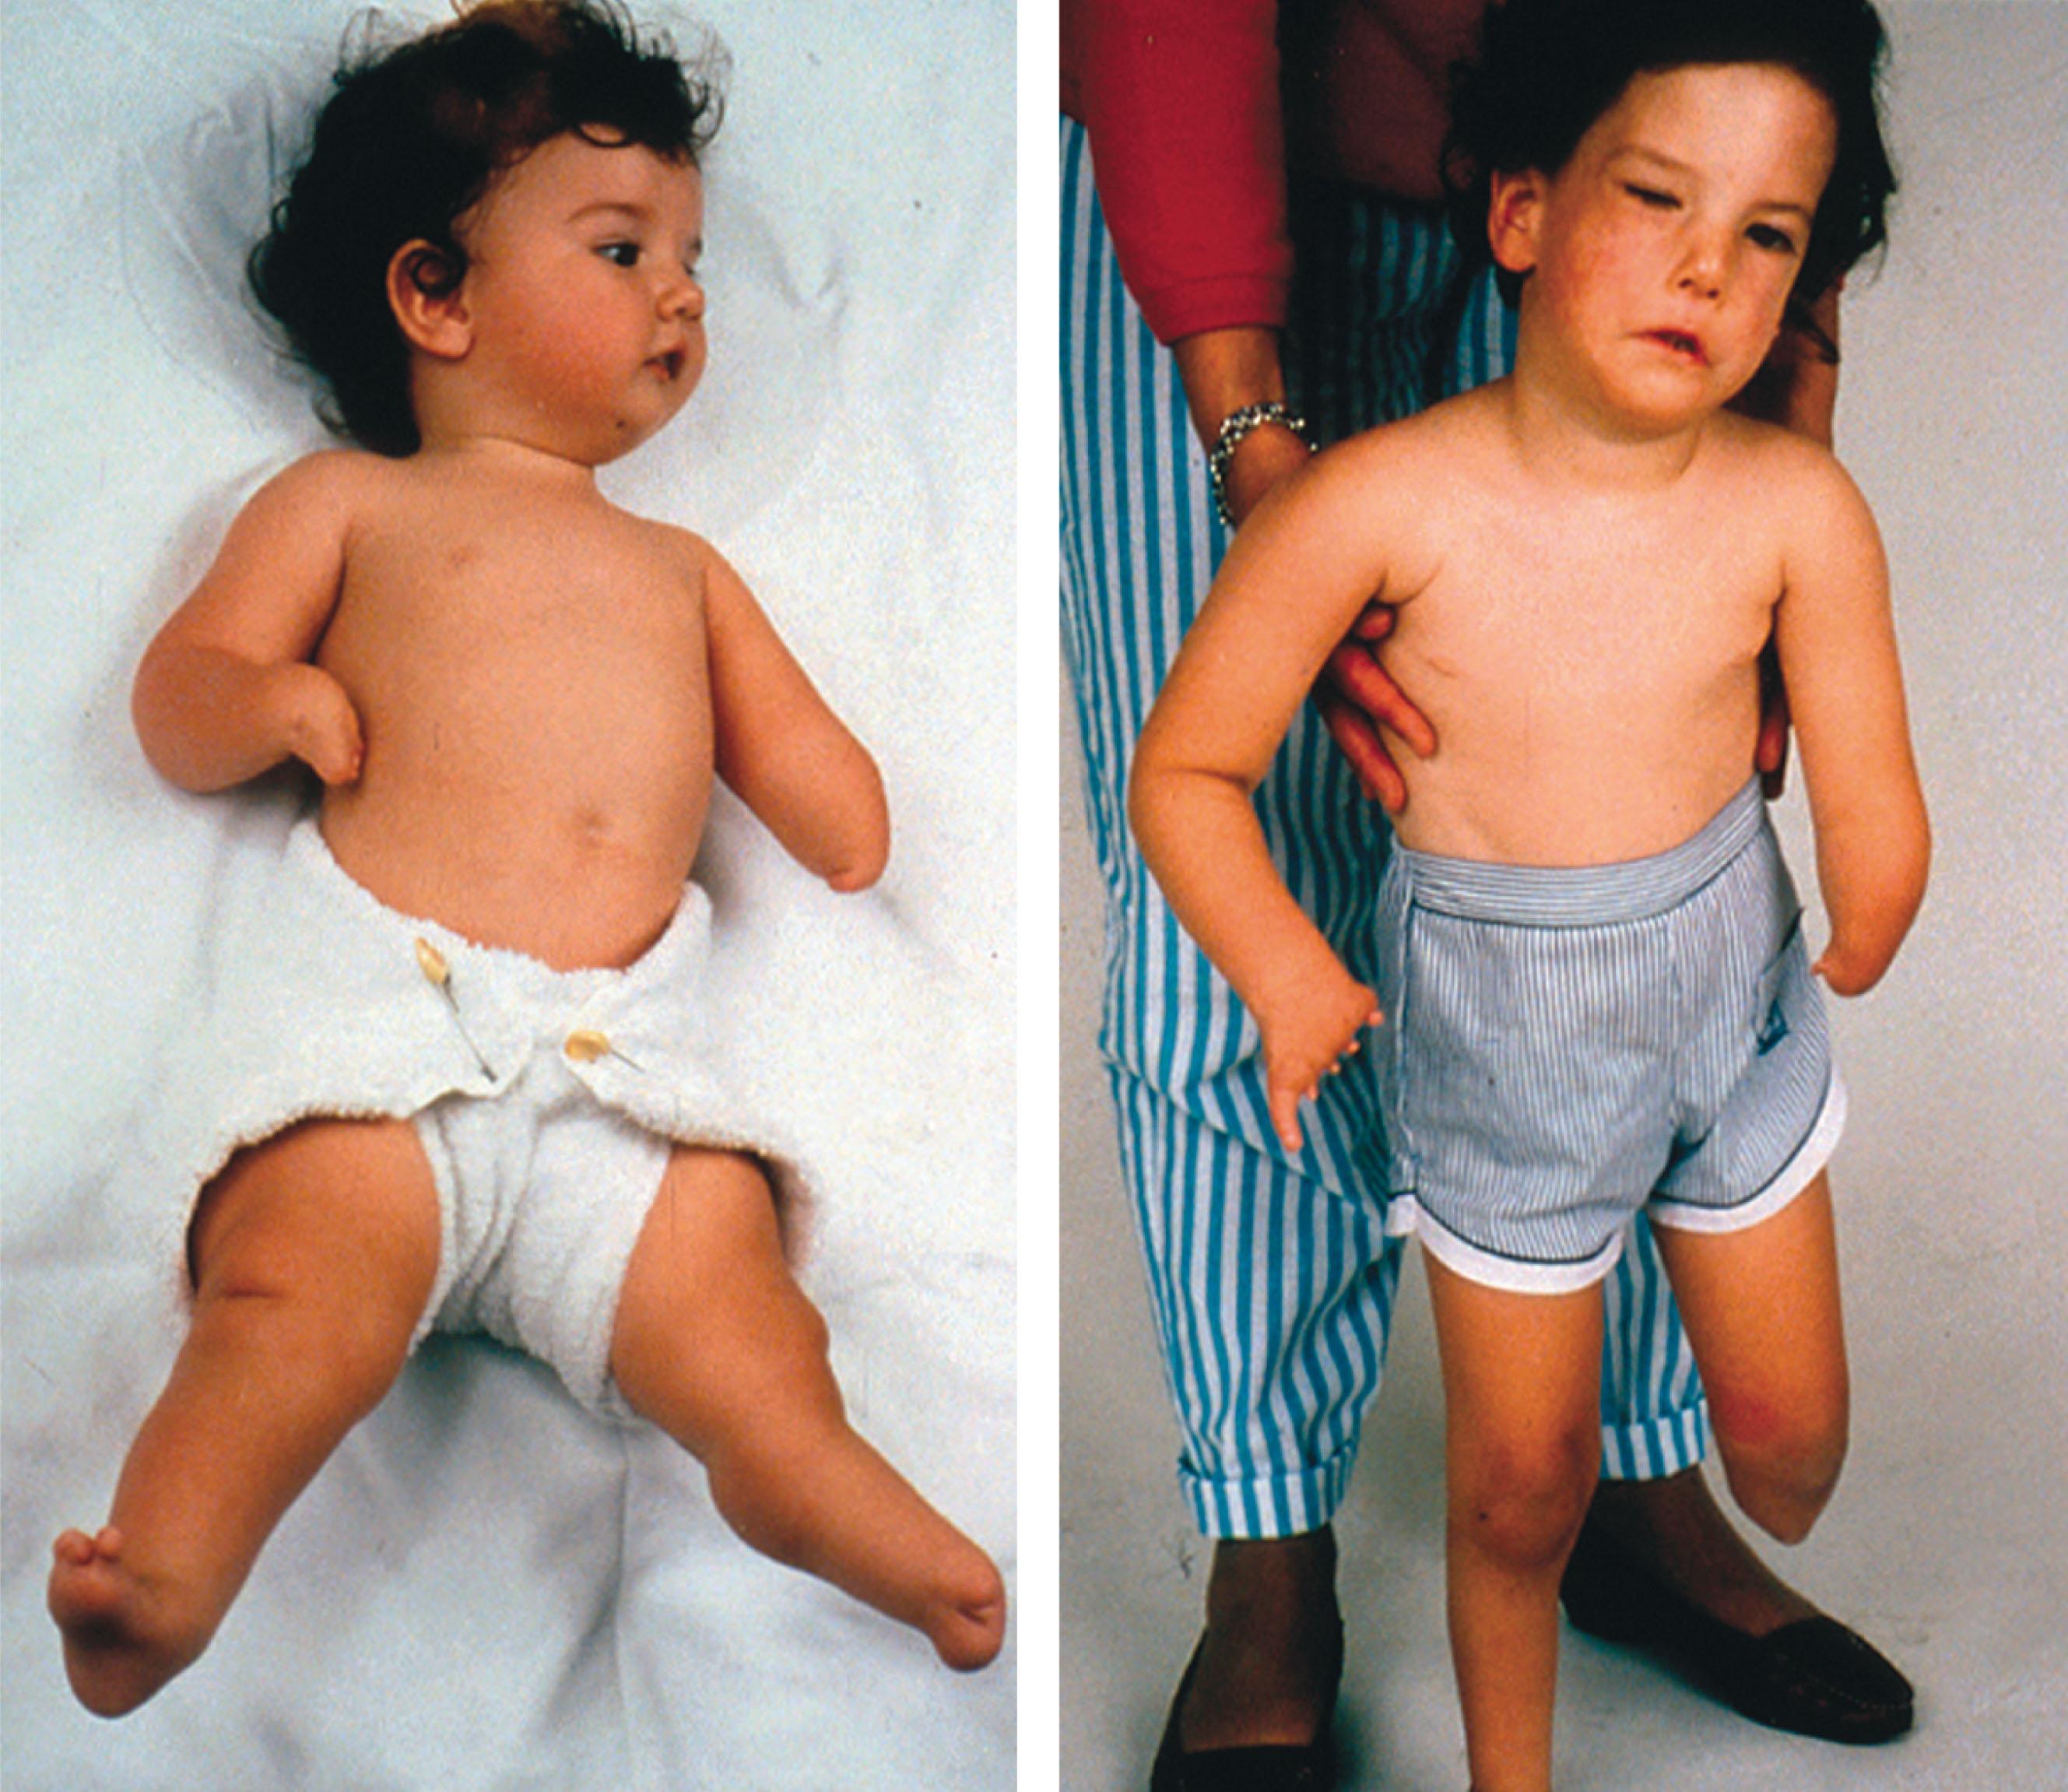 FIGURE 50.2, These children were born following prolonged high fever at 7 weeks’ gestation with terminal transverse limb-reduction defects, ankyloglossia, missing teeth, and bilateral sixth and seventh cranial nerve palsies. This same pattern of defects has been induced experimentally in animals following exposure to heat at an equivalent stage of gestation.